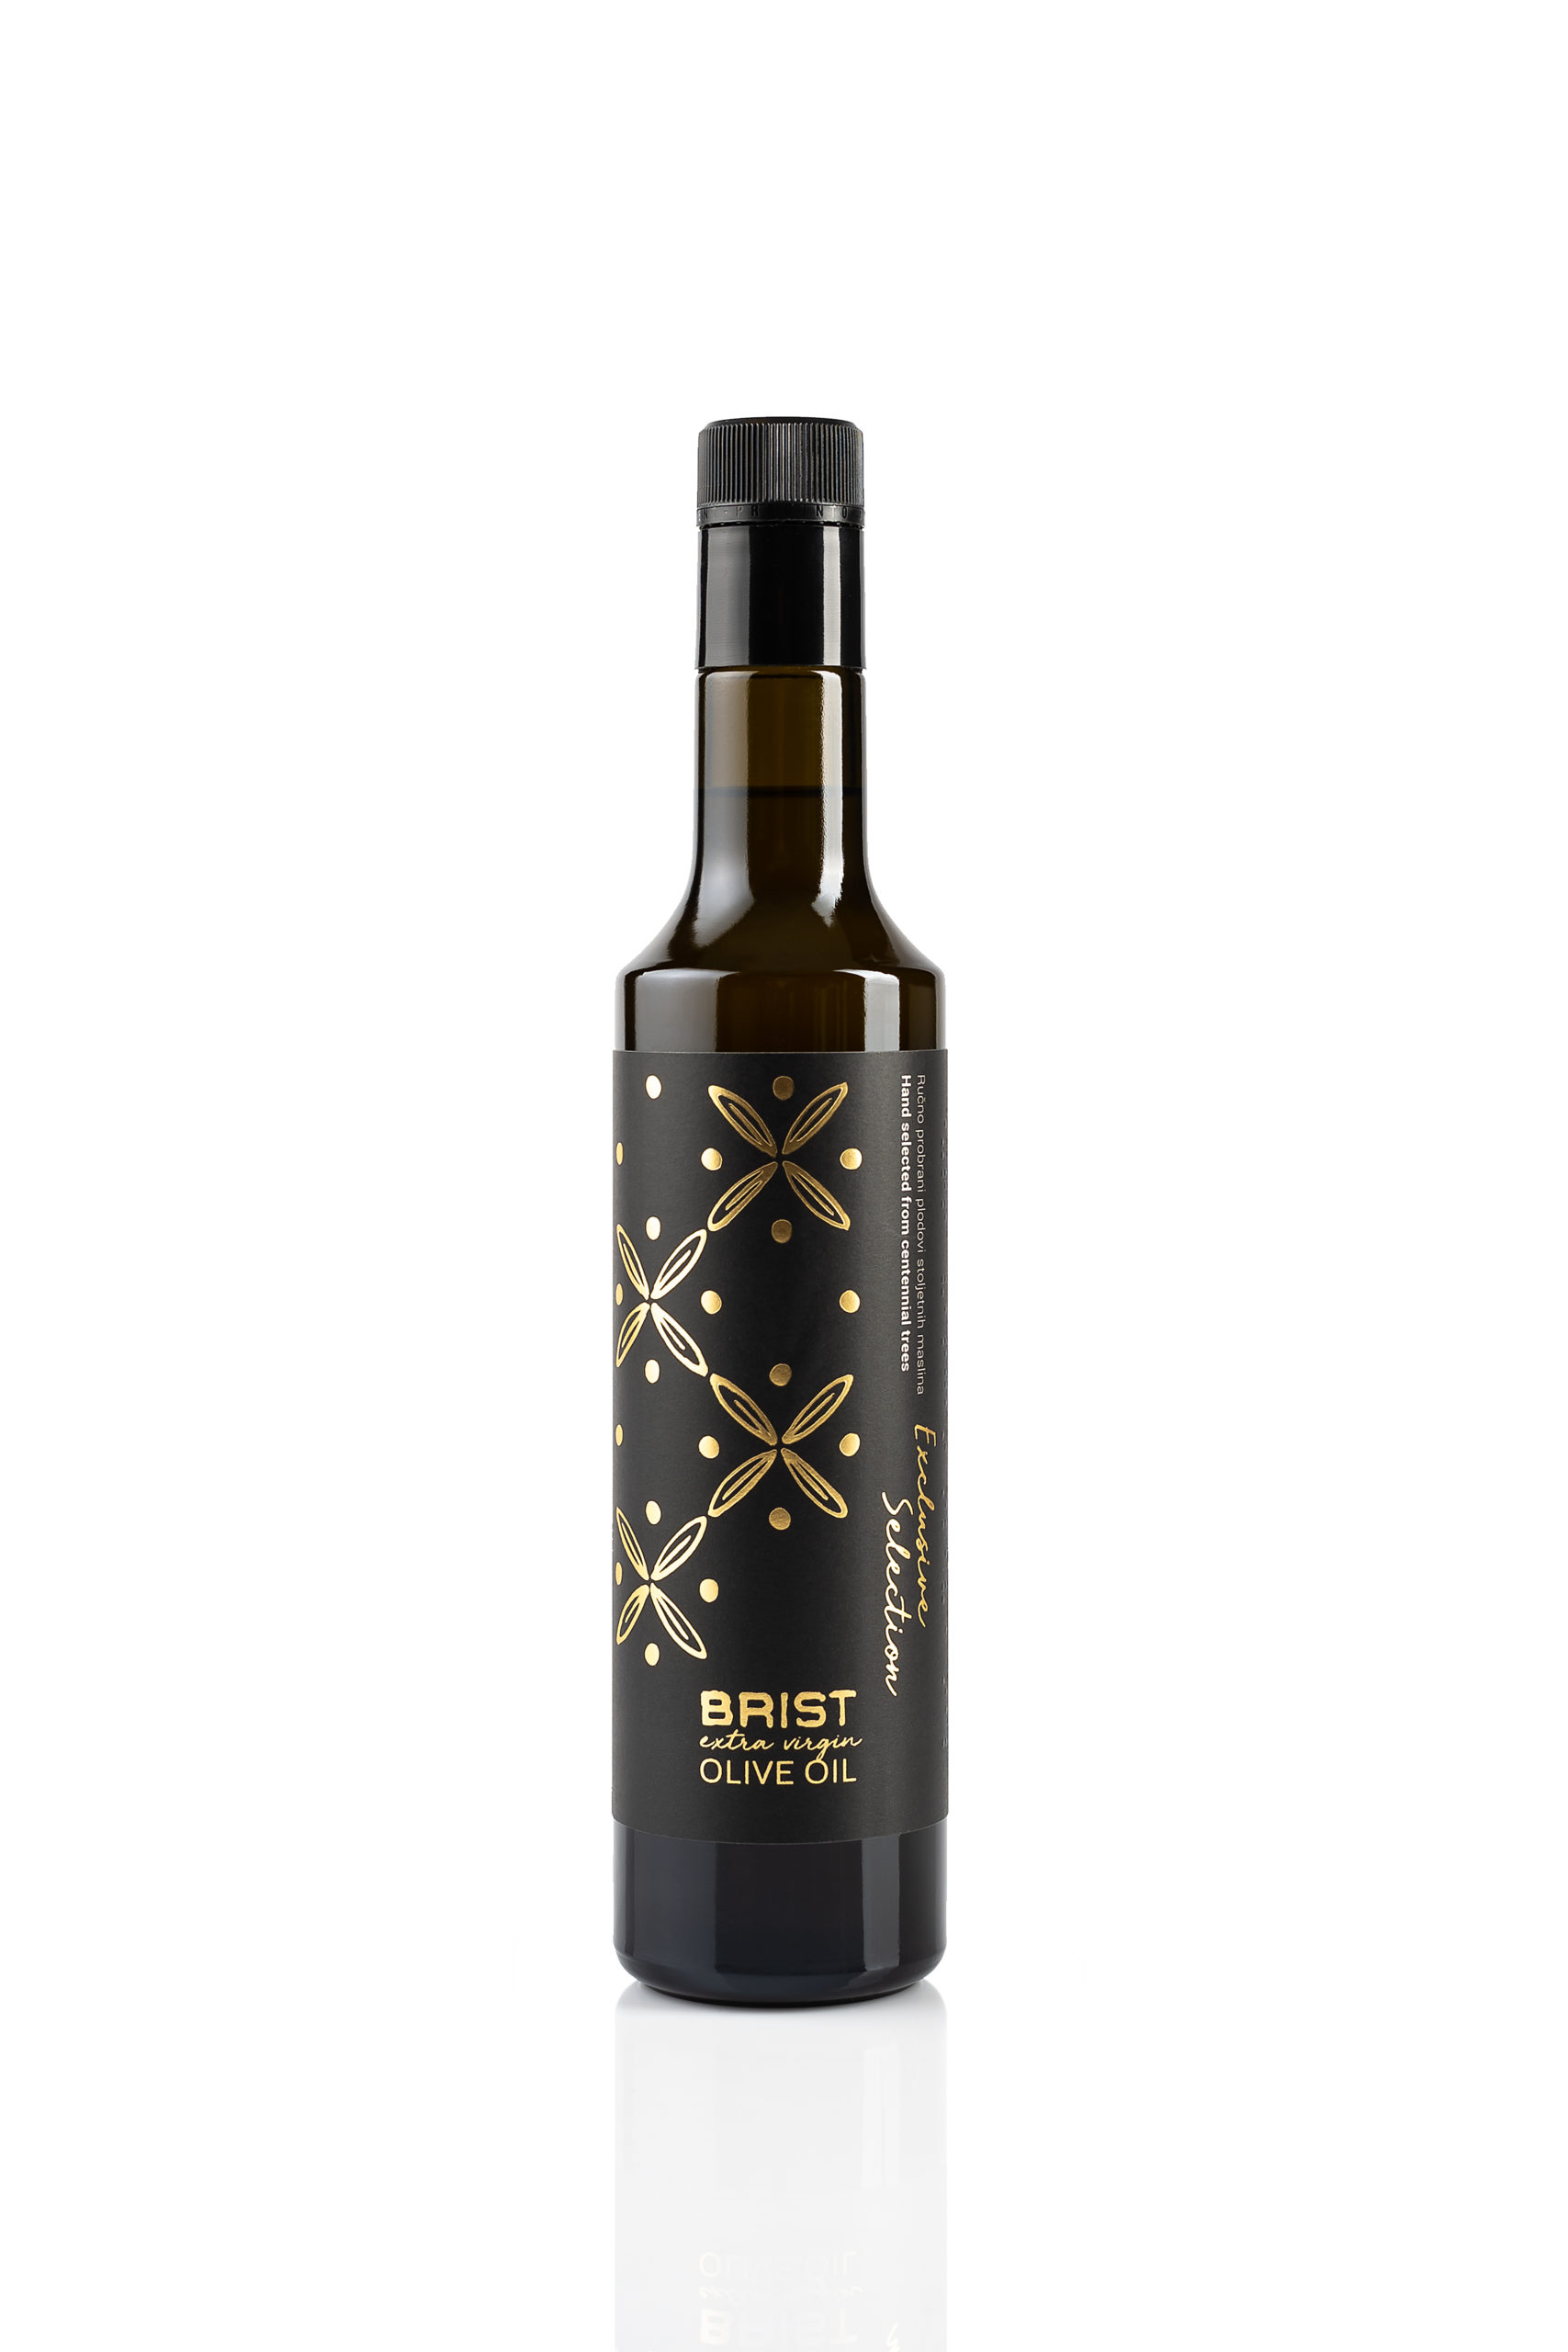 hren | plethora of creativity // Brist Olive Oil product photography